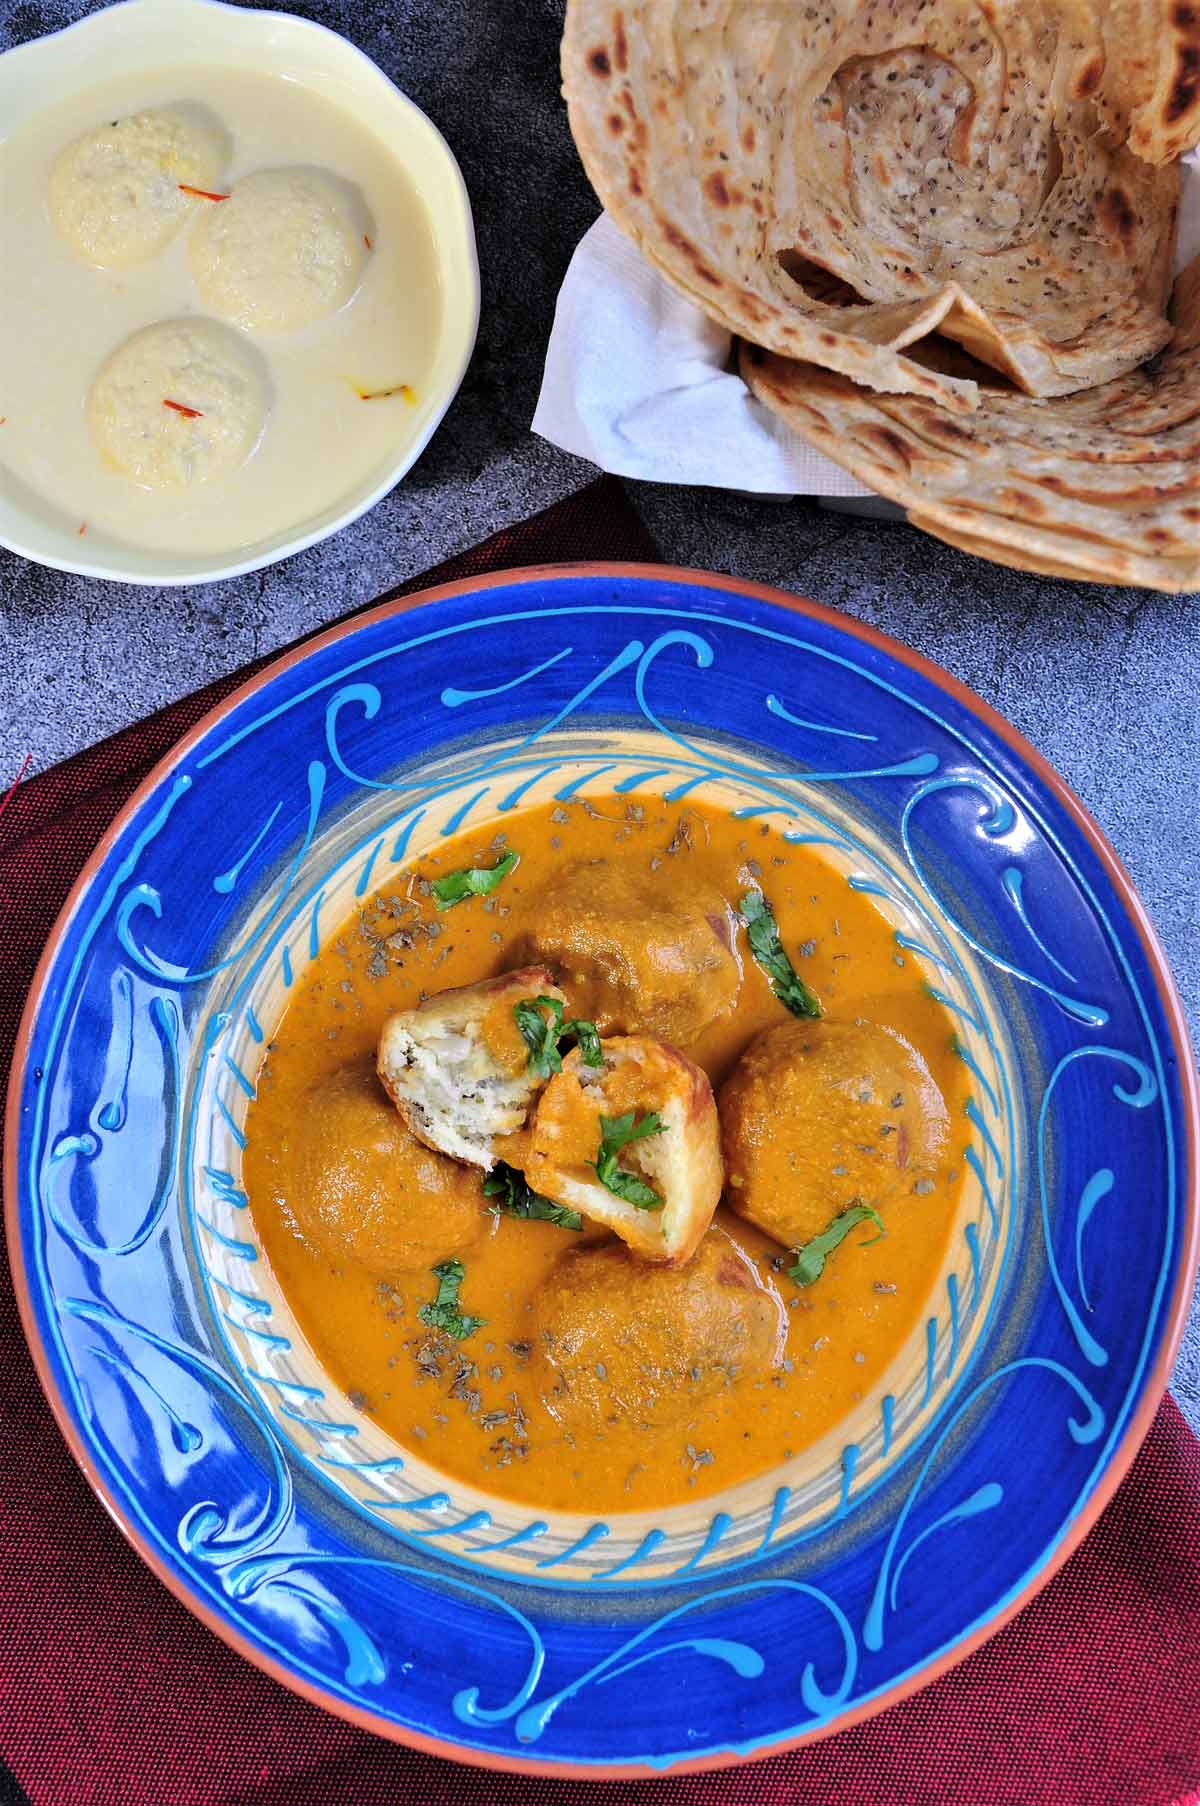 malai kofta served in a bowl with paratha and rasmalai in background.